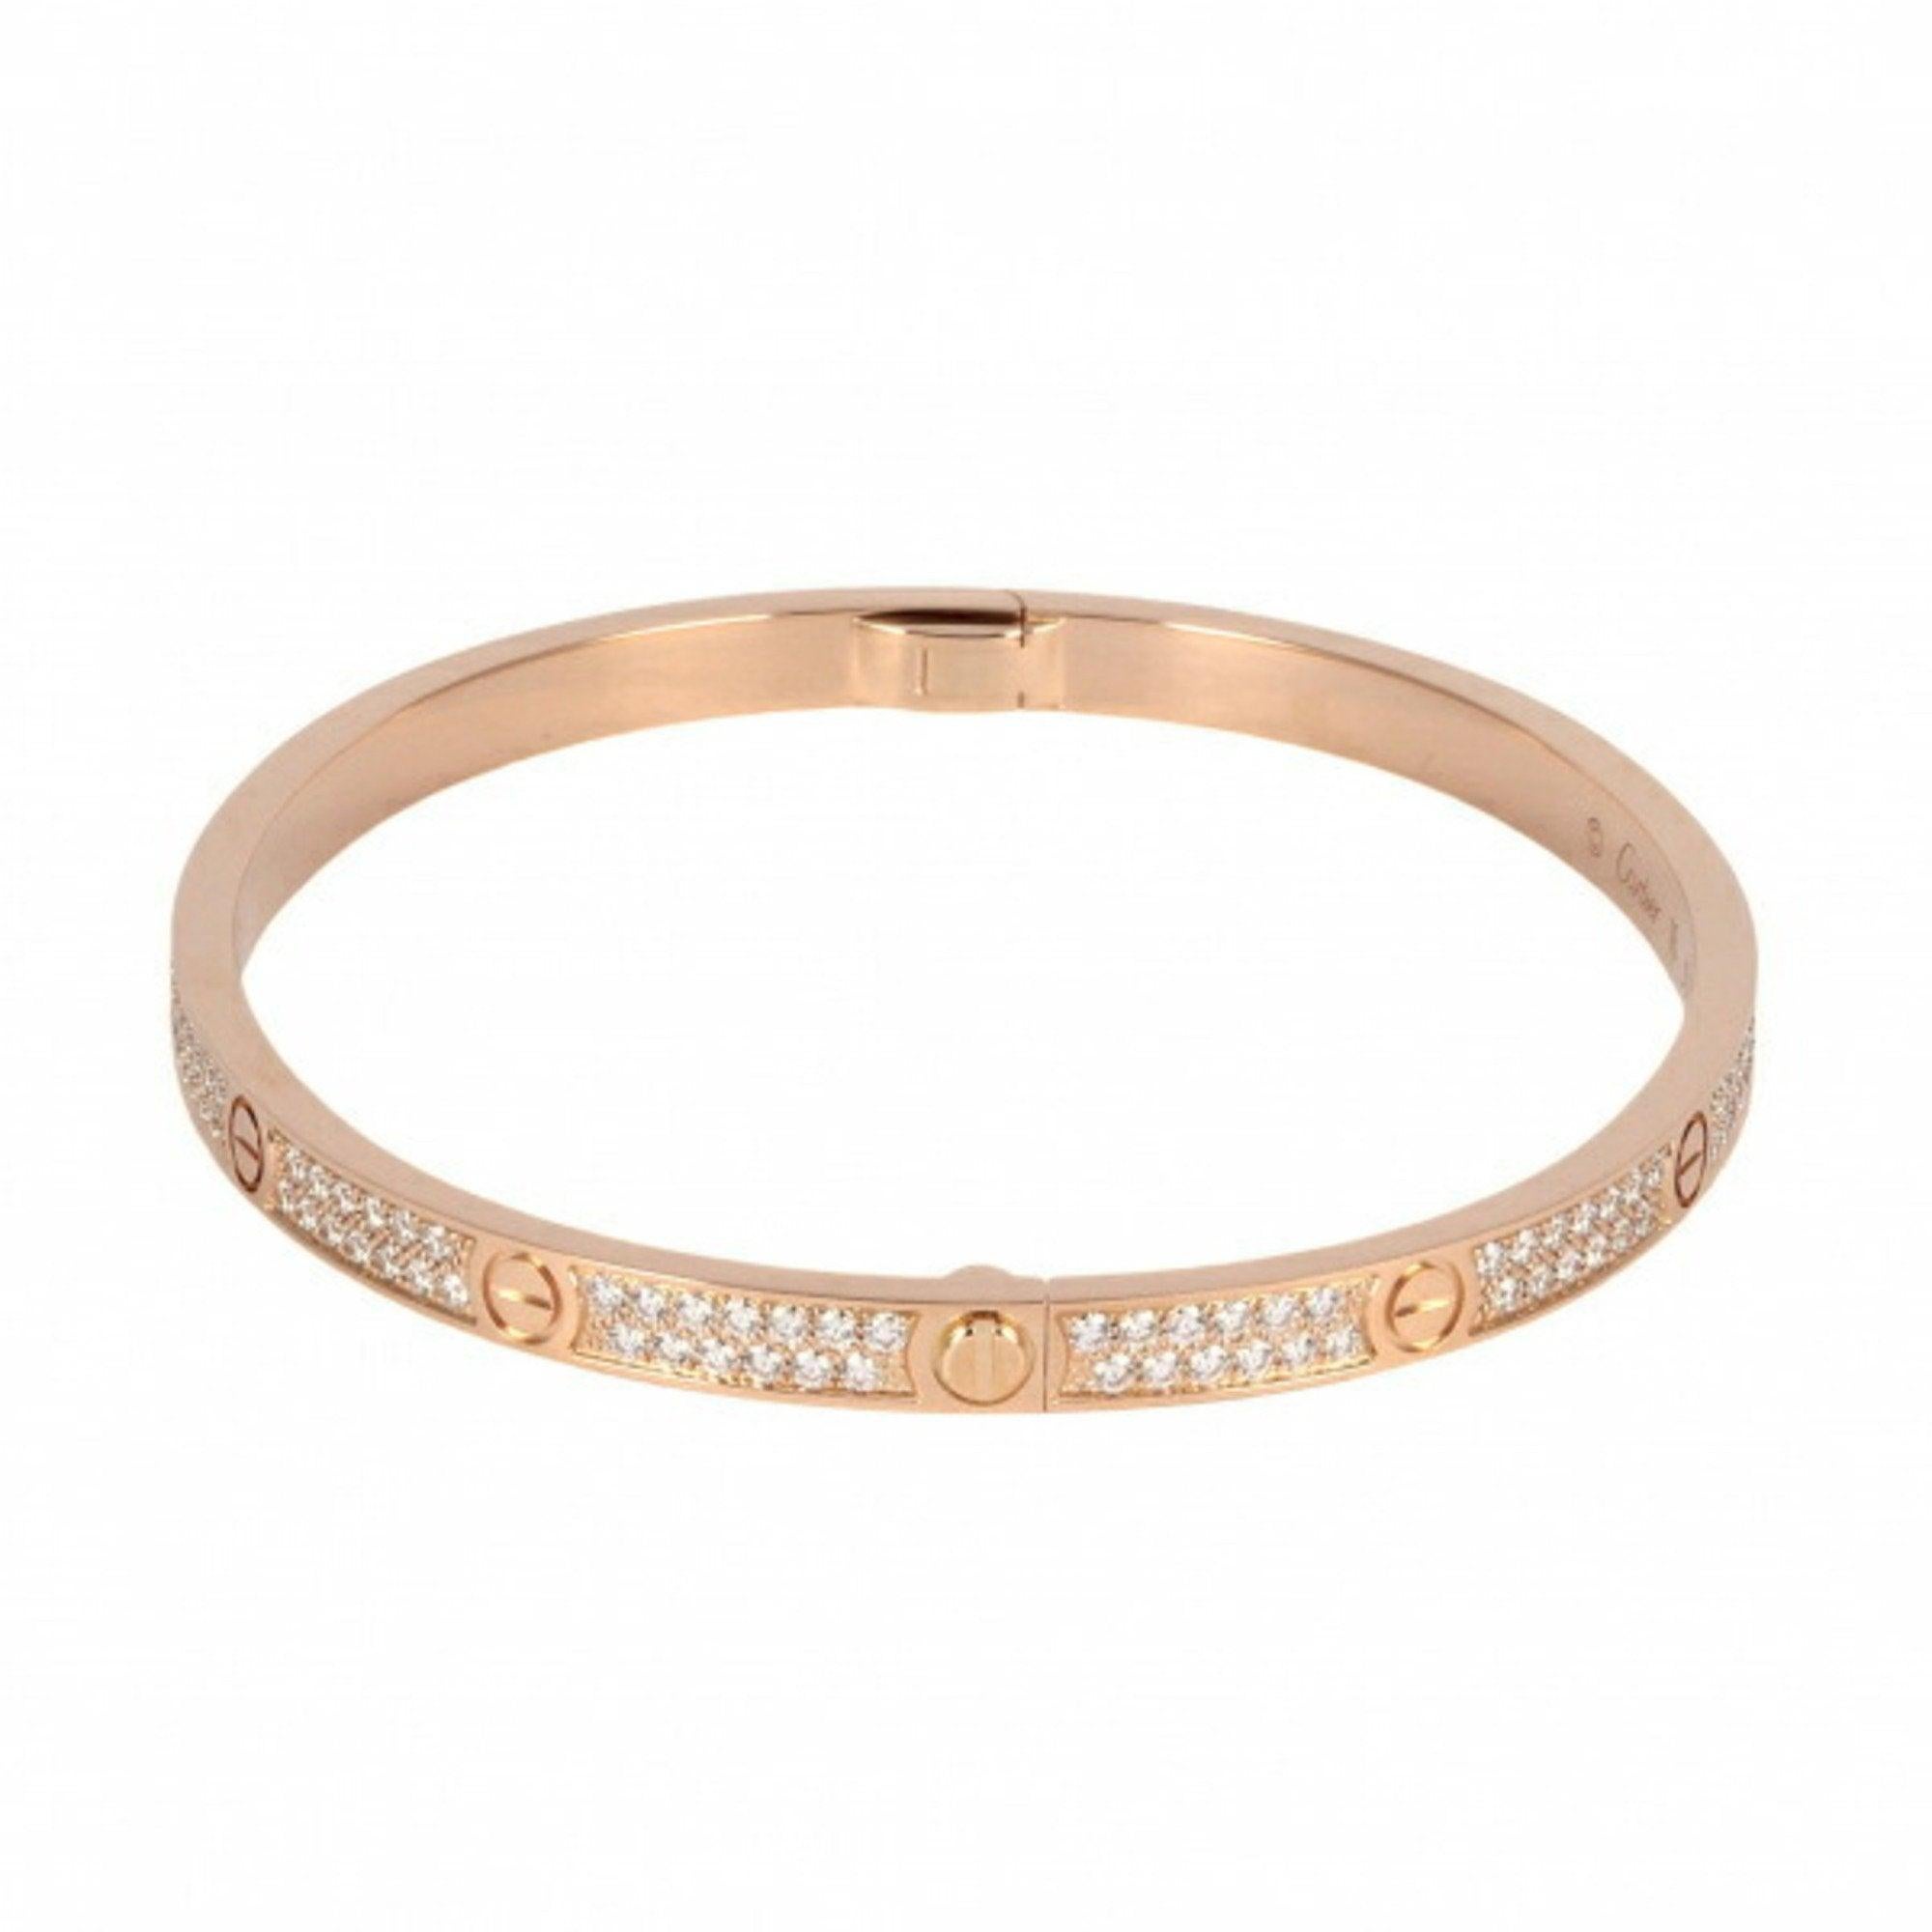 Cartier Love Bracelet in 18K Pink Gold

Additional information:
Brand: Cartier
Line: Love
Material: Pink gold (18K)
Condition: Good
Condition details: The item has been used and has some minor flaws.
Before purchasing, please refer to the images for